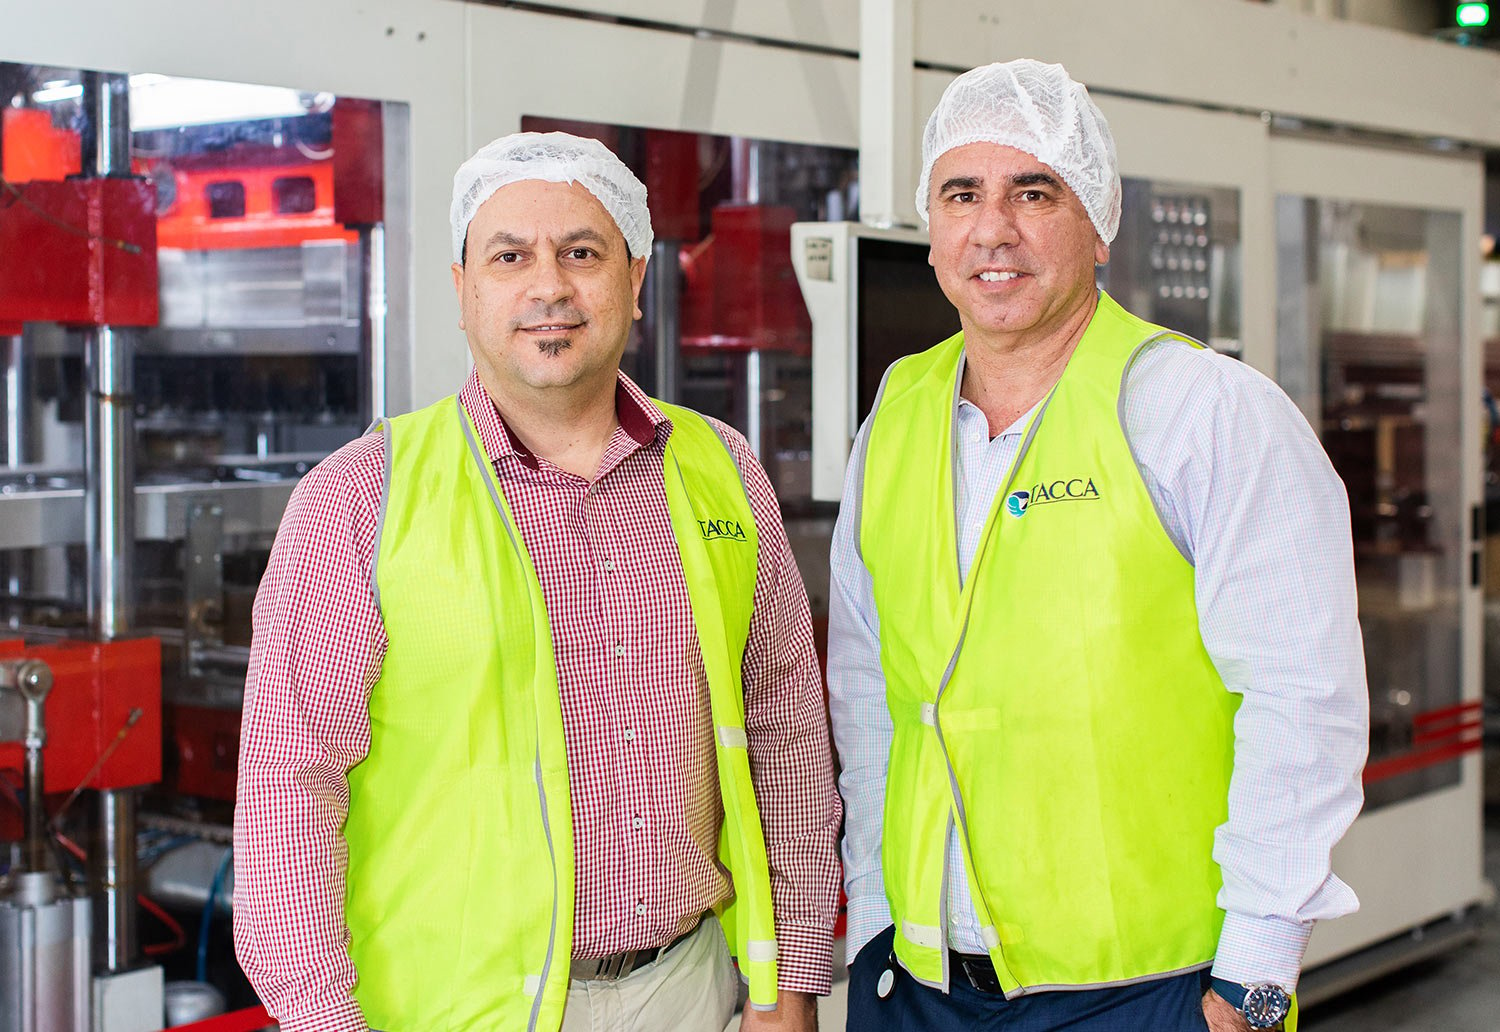 Tacca Industries Managing Director - Domenic Tacca and Chief Executive Officer - Clem Tacca